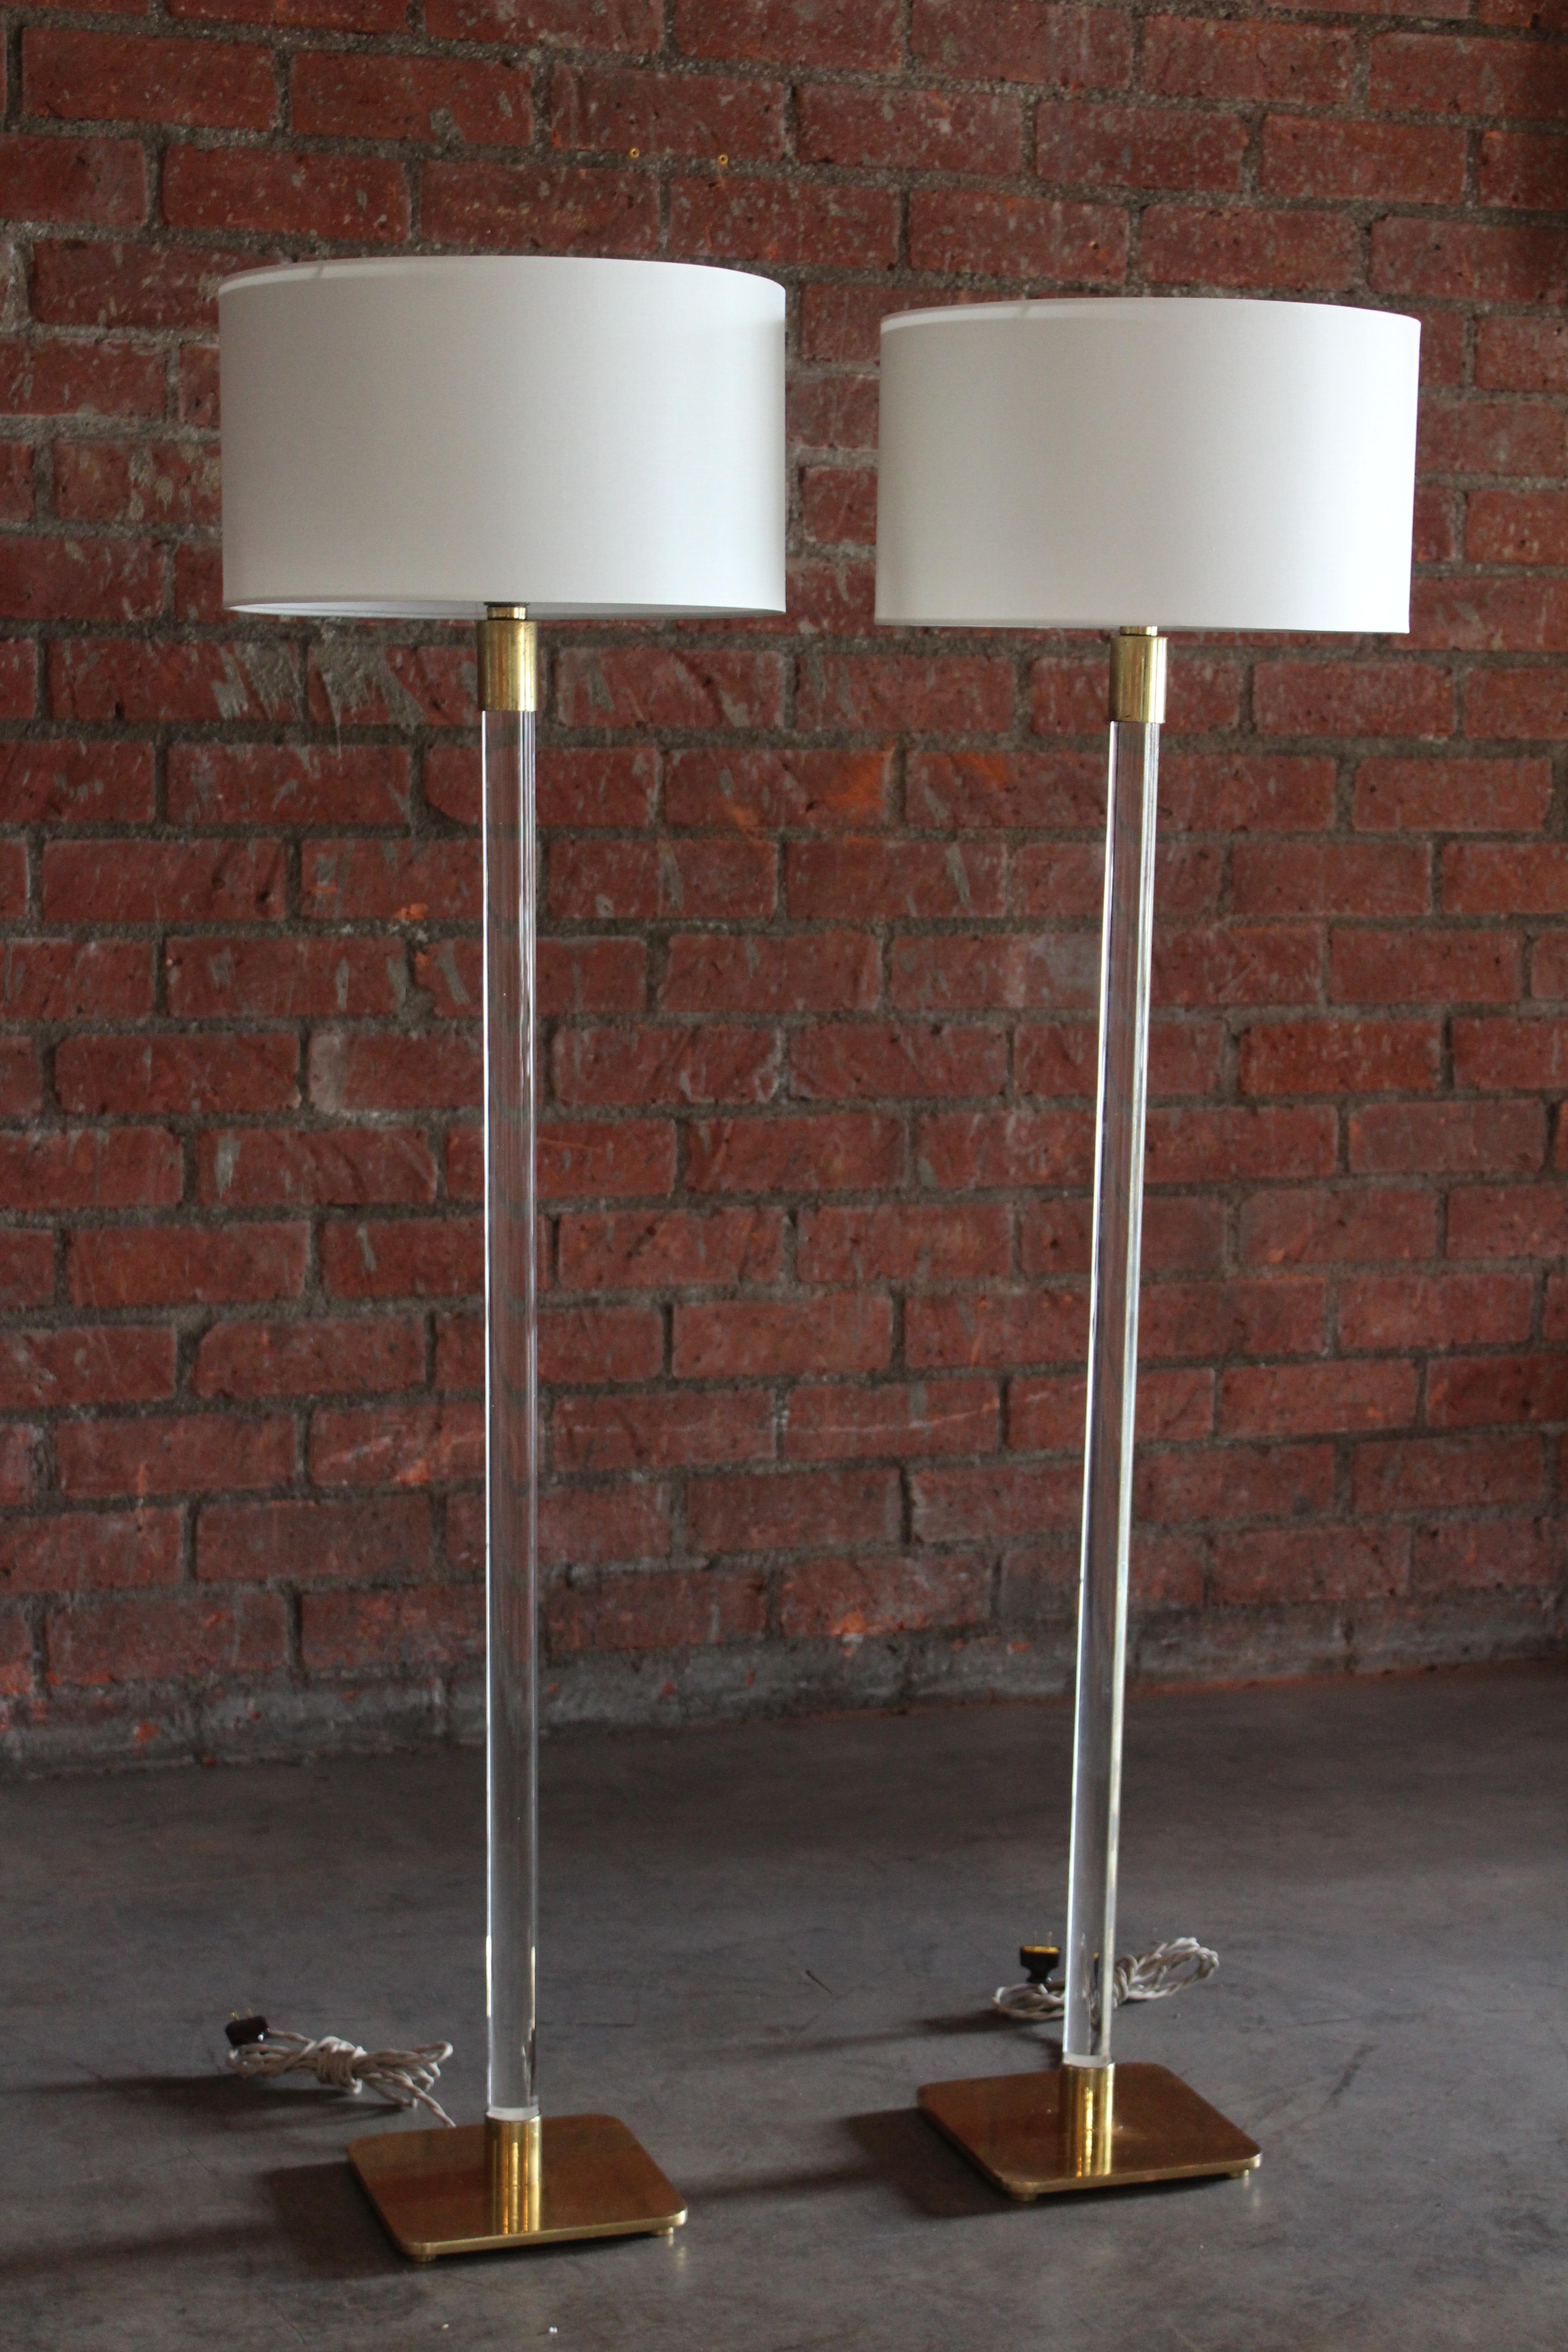 American Pair of Glass & Brass Floor Lamps by Hansen, NYC, 1970s For Sale